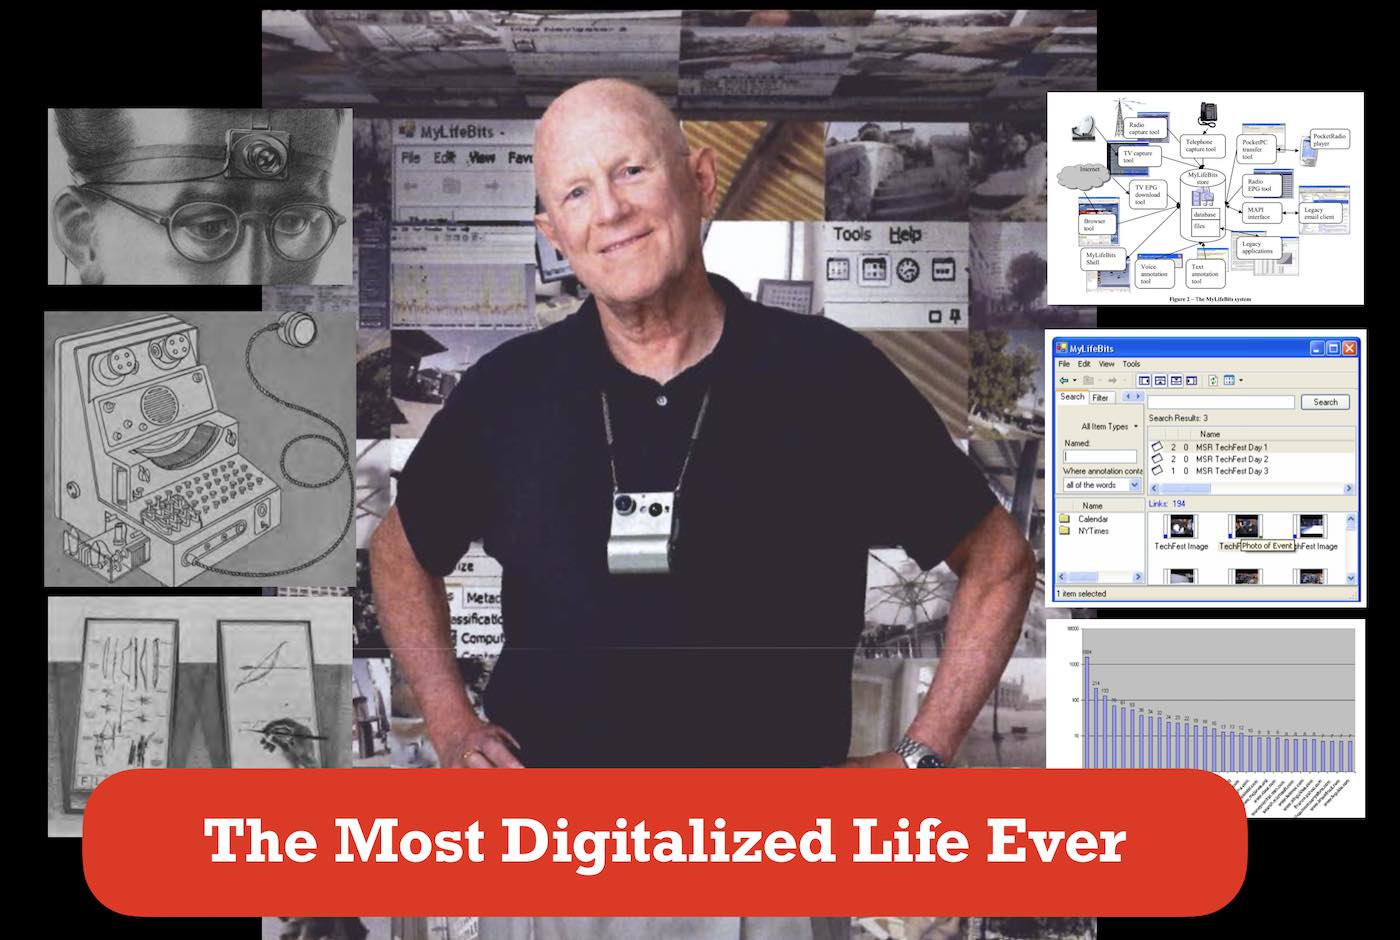 Gordon Bell and The Epic Quest to Digitalize Everything